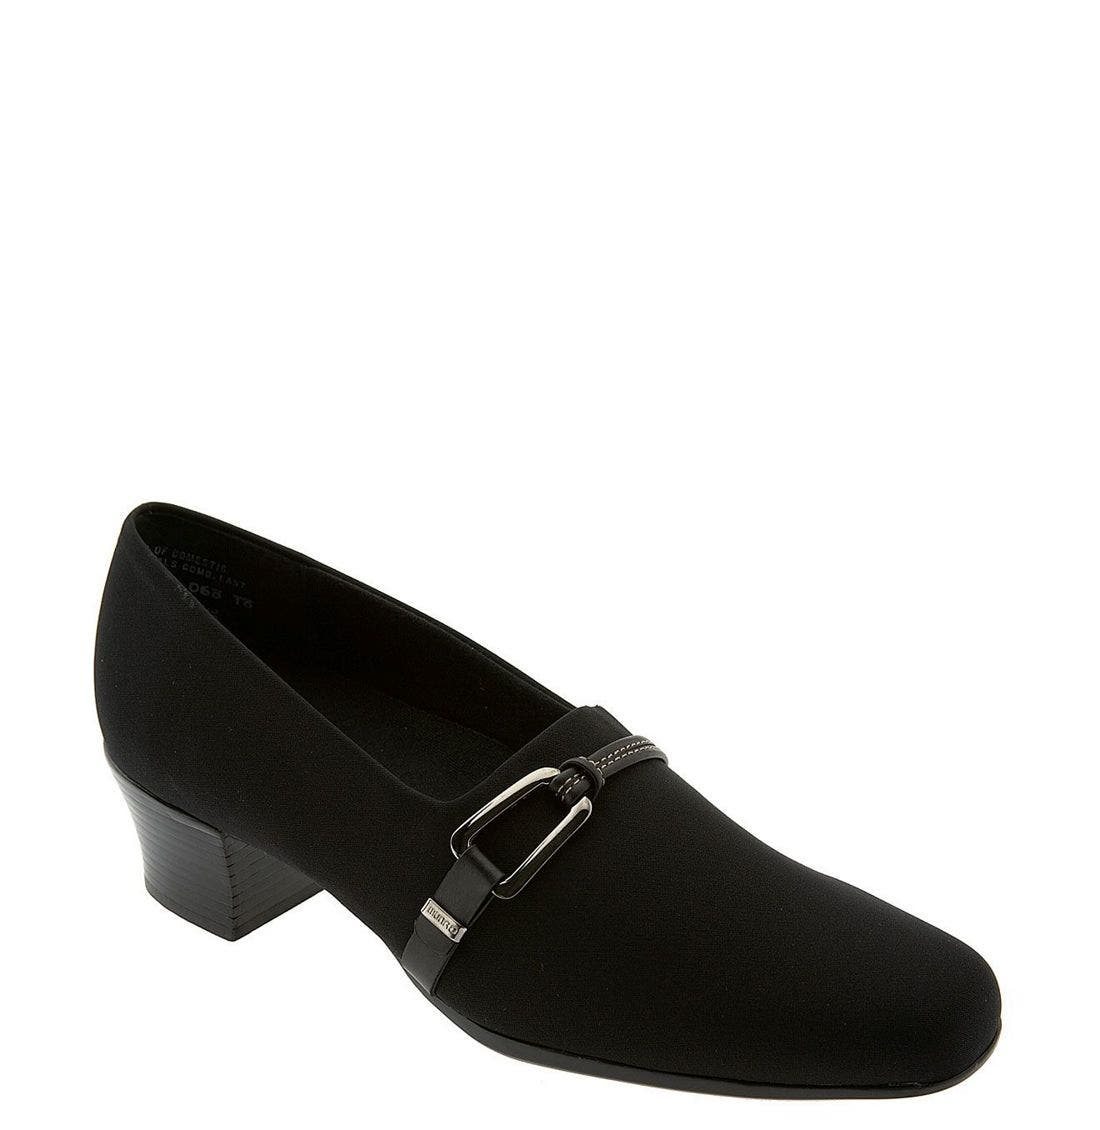 munro women's shoes nordstrom